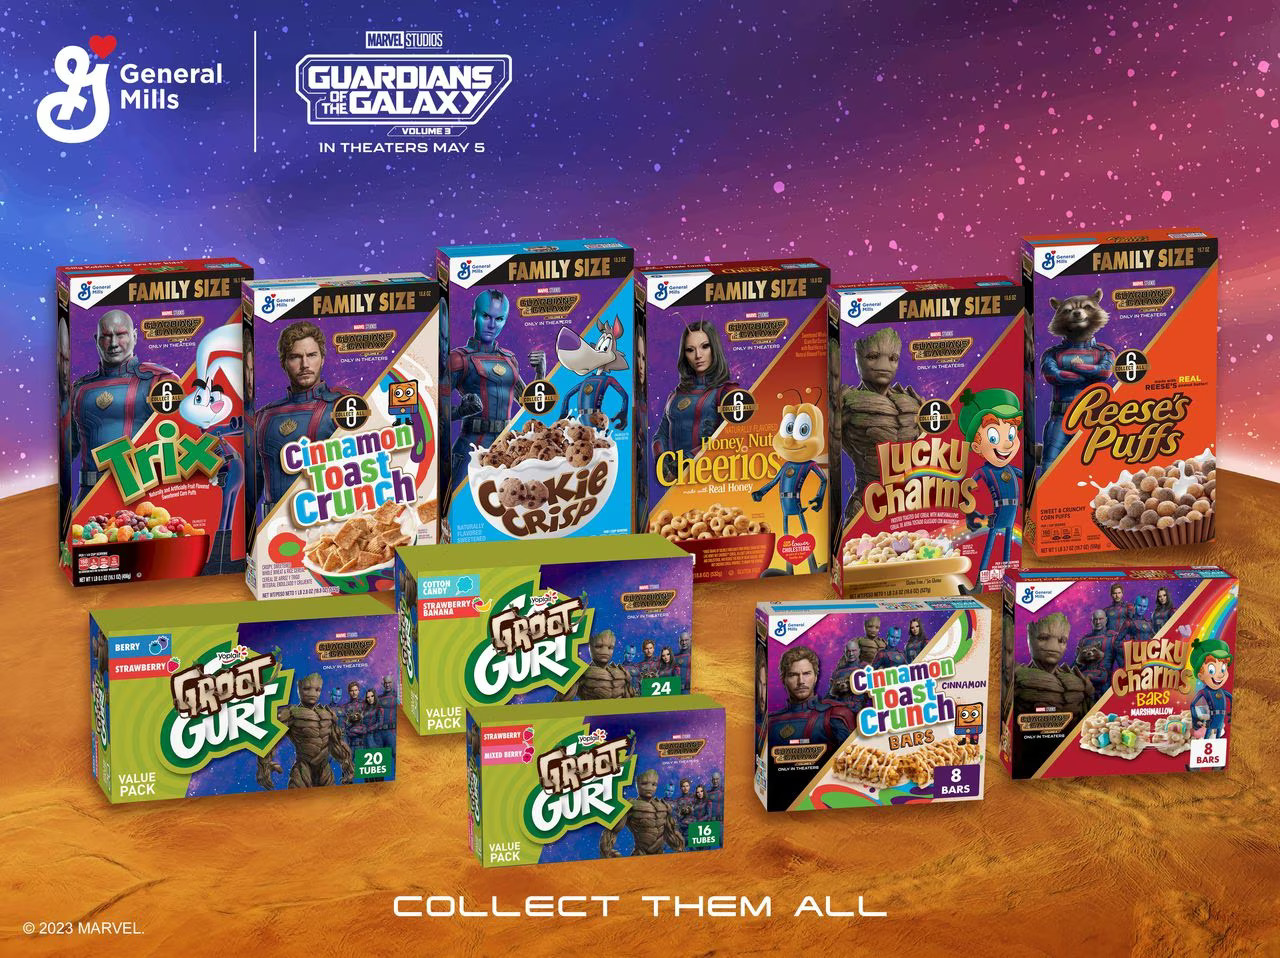 General Mills Teams Up with Guardians of the Galaxy Vol. 3” for Limited-Edition Products